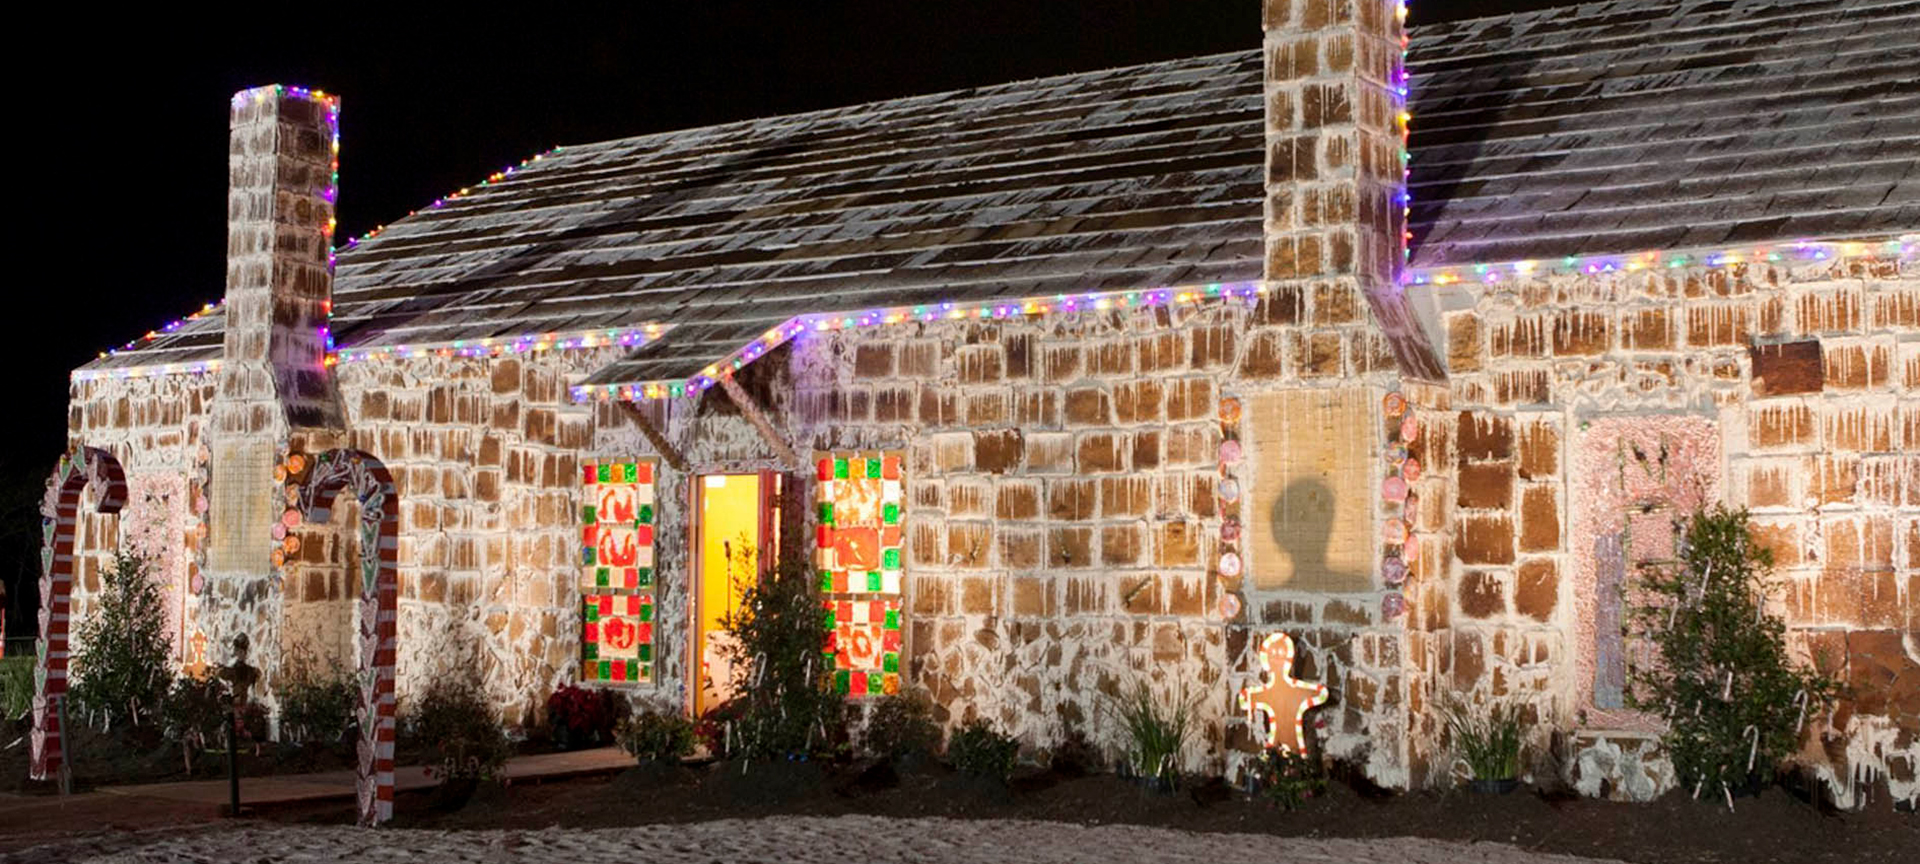 World's Largest Gingerbread House featured on Rueters: Creator: HANDOUT | Credit: Reuters